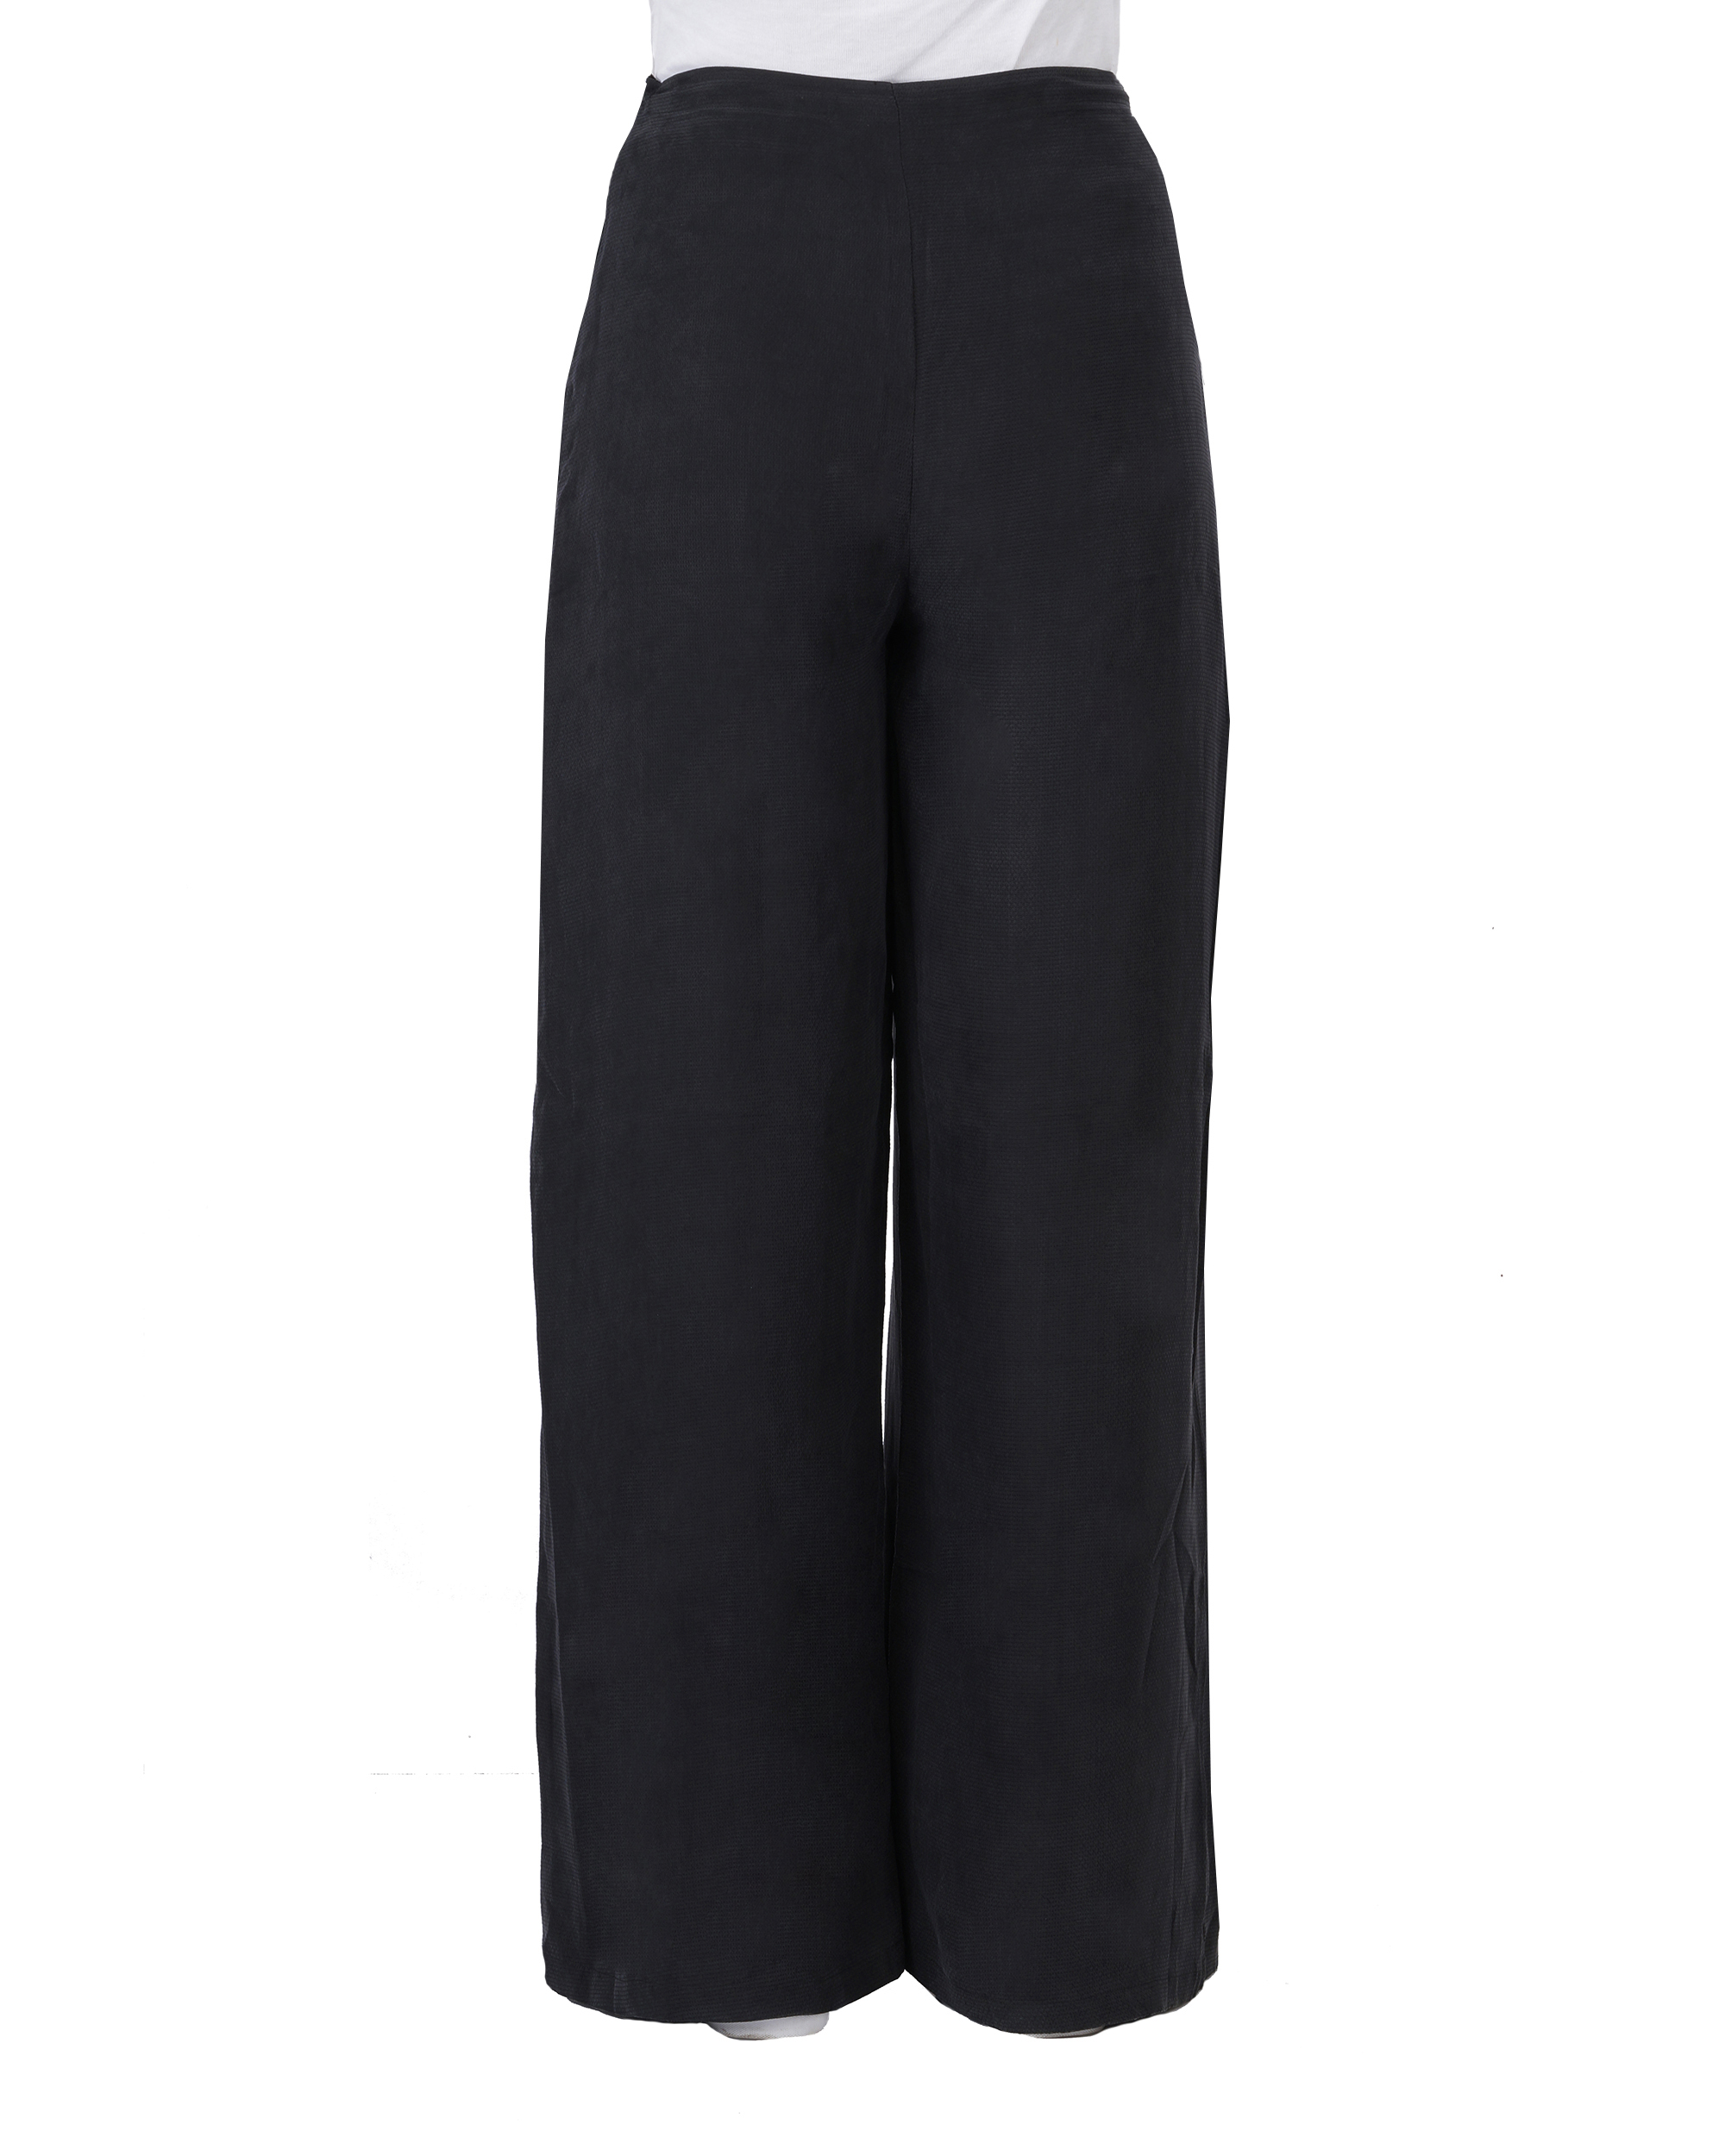 Black cupro front pleated pants by THREE | The Secret Label